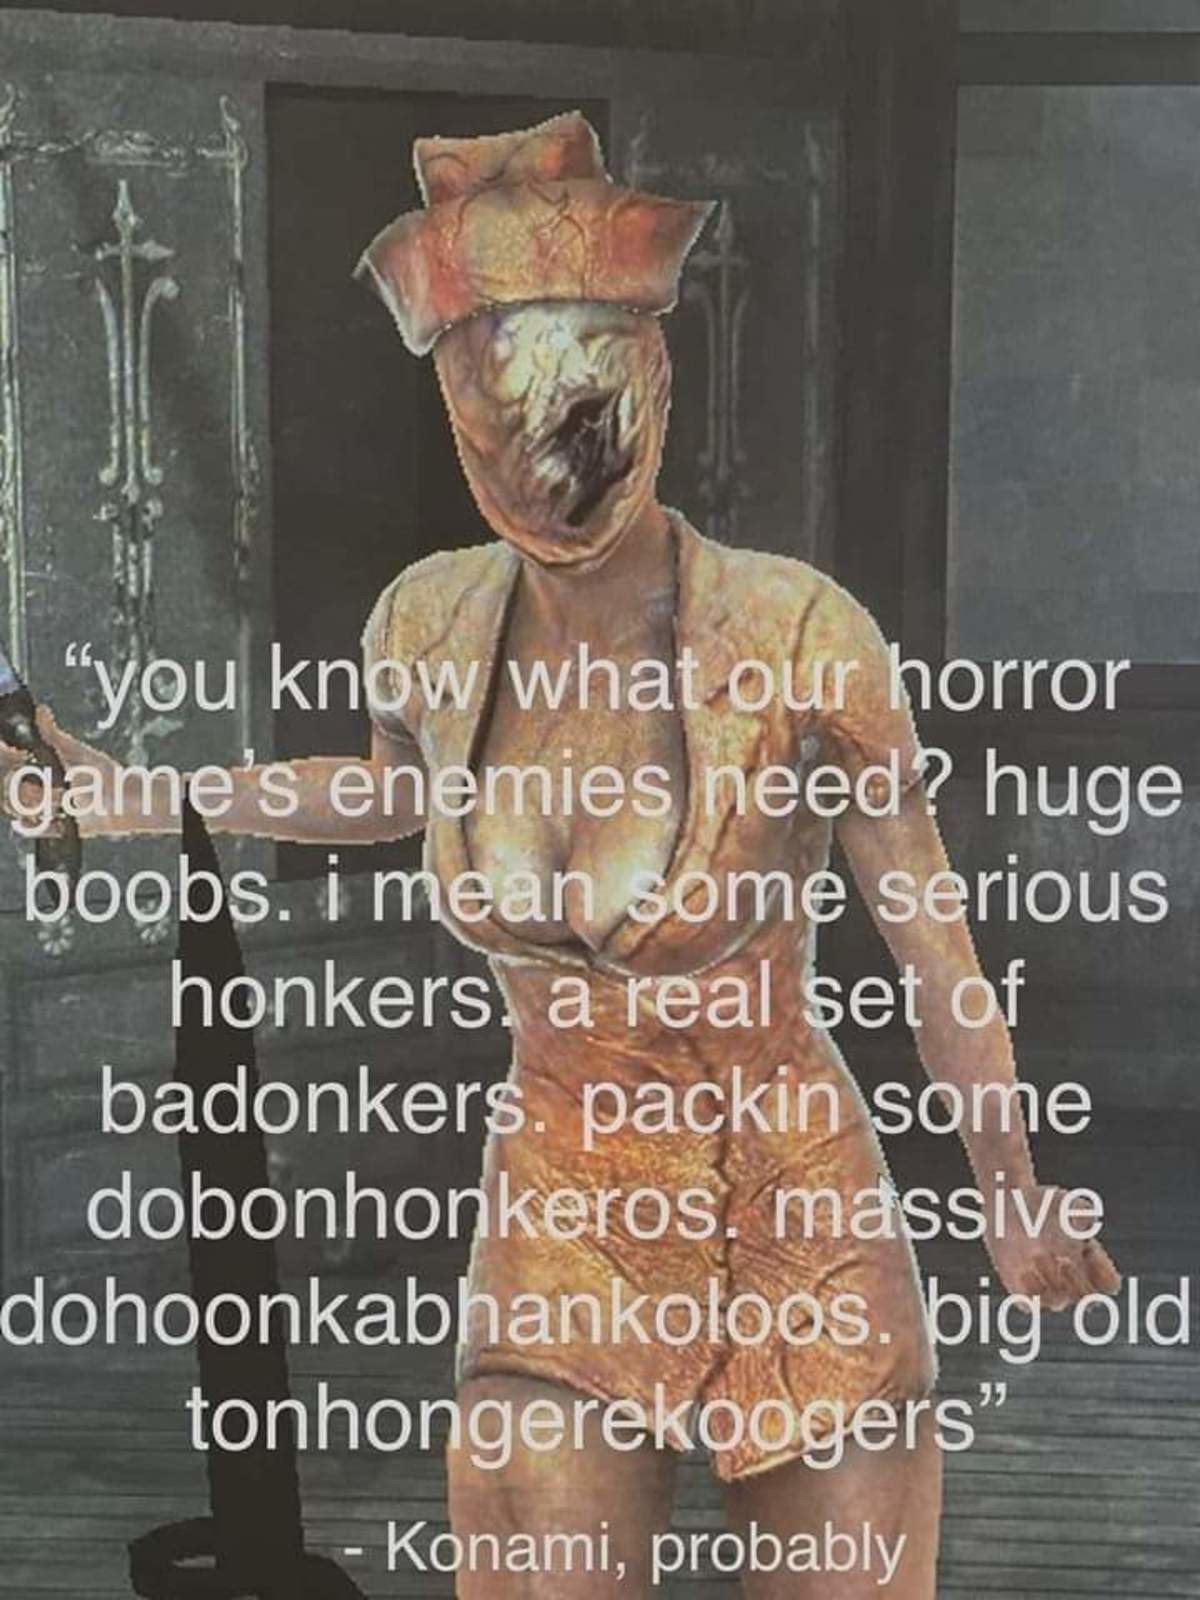 Old Konami. .. Worst part is, yes, the tits are intentional and make sense in that game. Silent Hill 2, if you guys are curious.